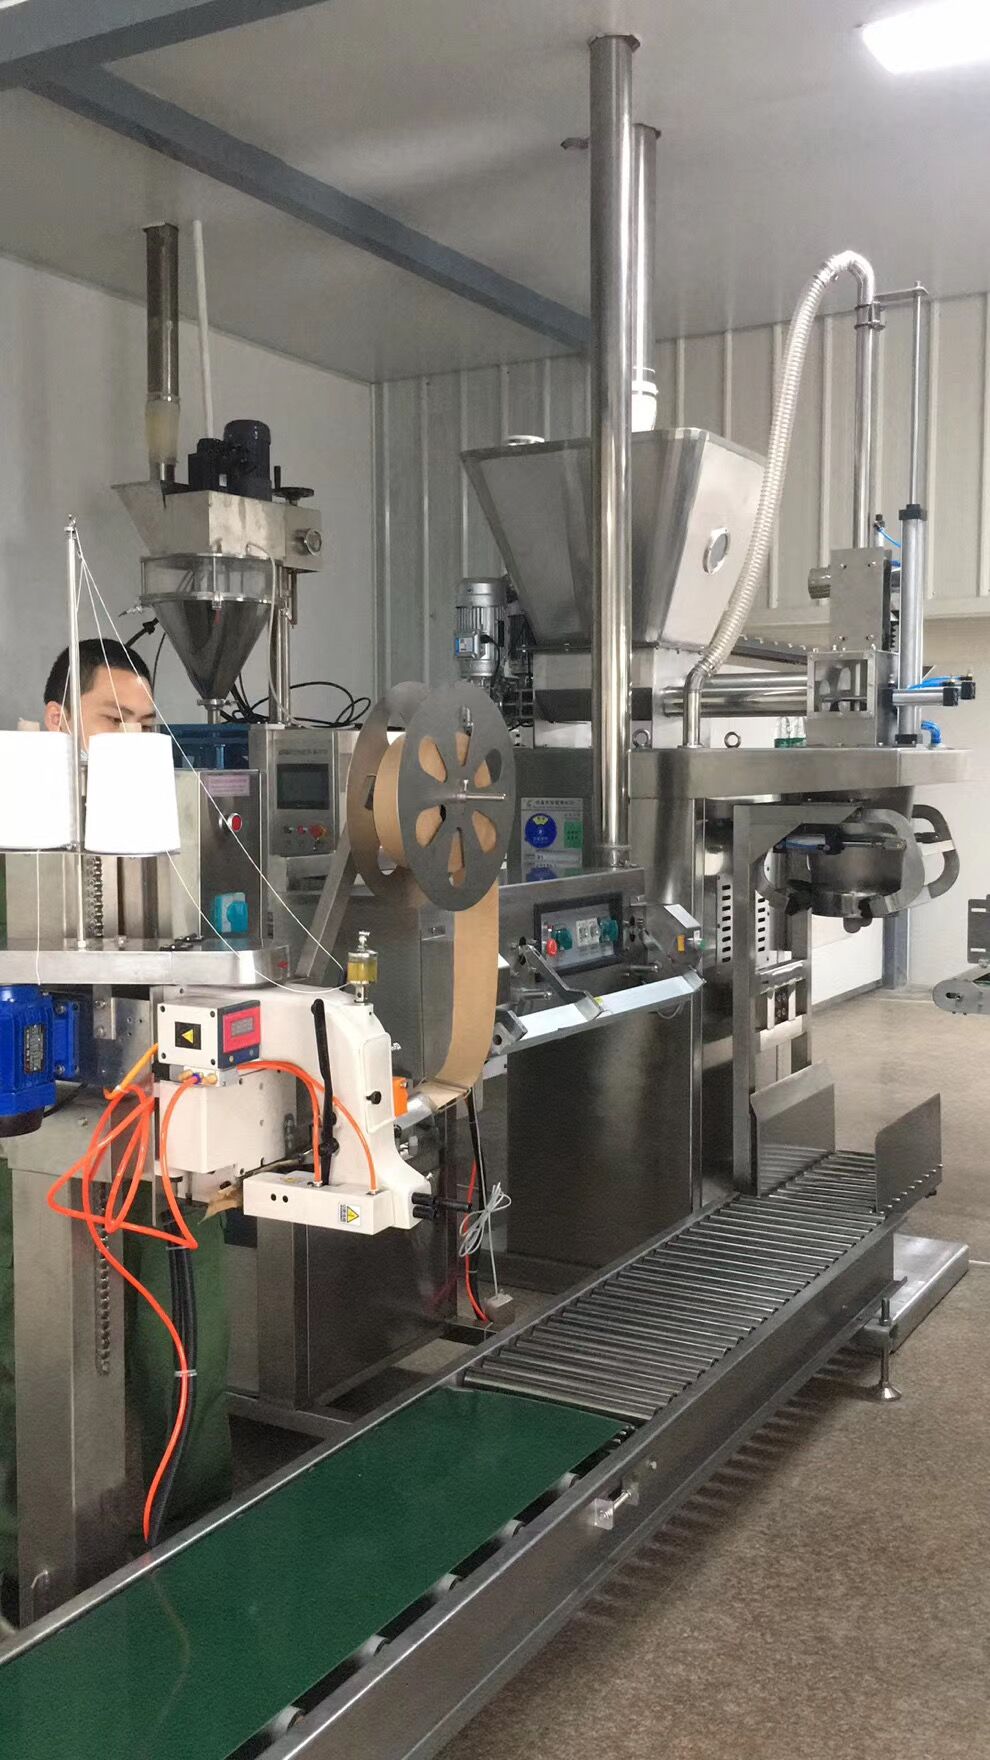 vitamin and mineral premix packaging machine Grower Mash bagging machine full automatic packing machine, automatic bagging, palletising and wrapping line, automated bagging machine and palletizing lin